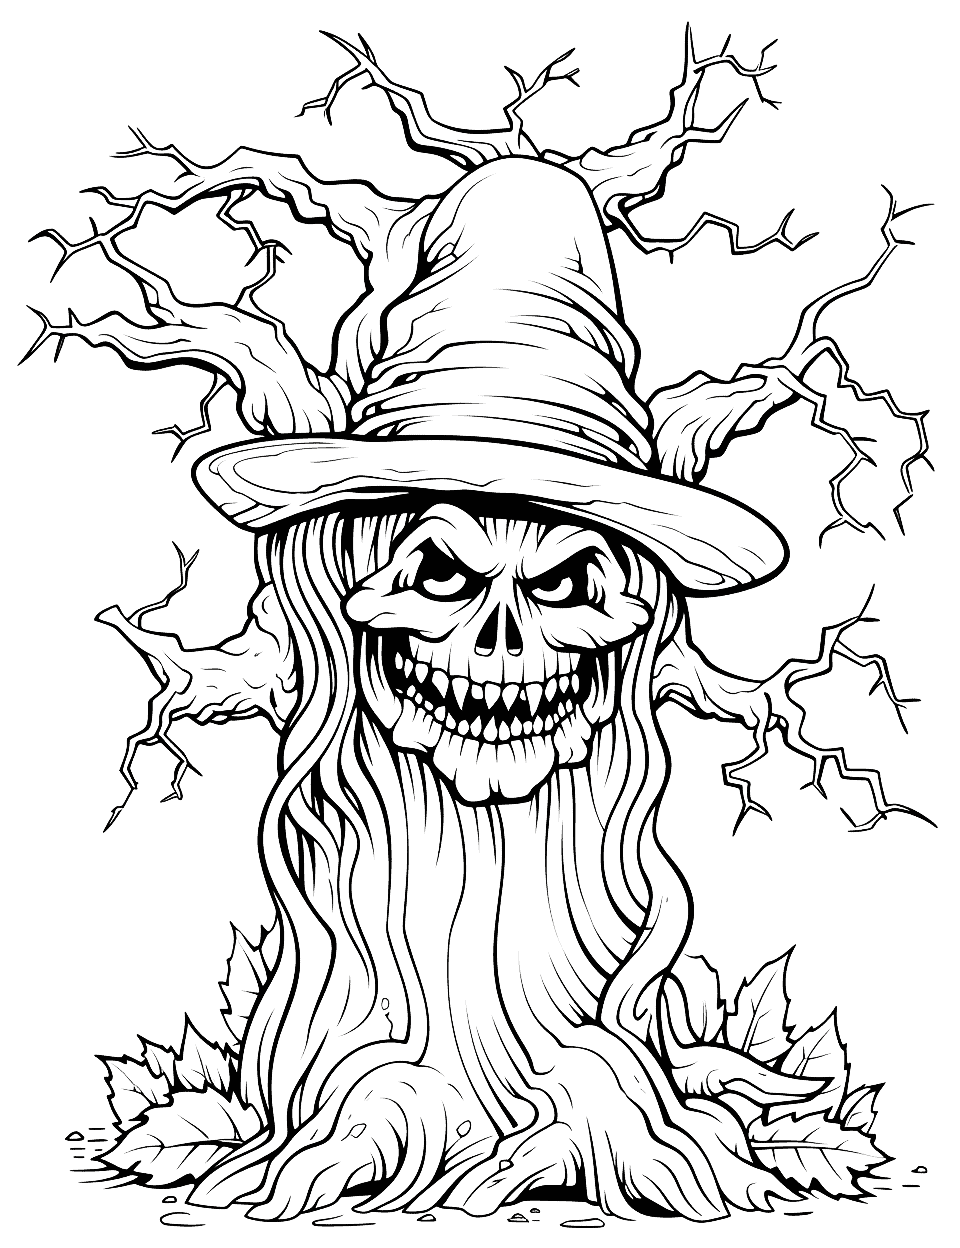 Spooky Old Tree Halloween Coloring Page - A gnarled old tree with a face, surrounded by fallen leaves.